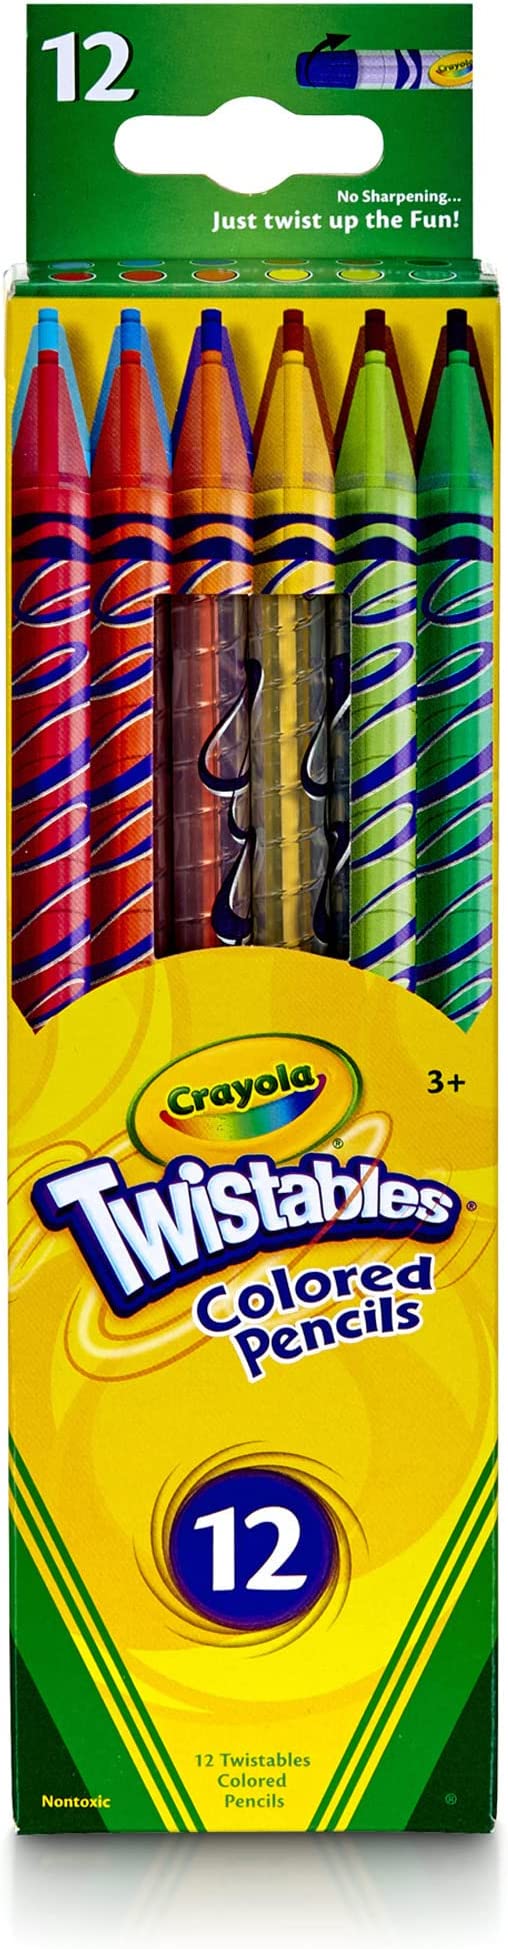 Crayola  Twistable Colouring Pencils - Pack of 10